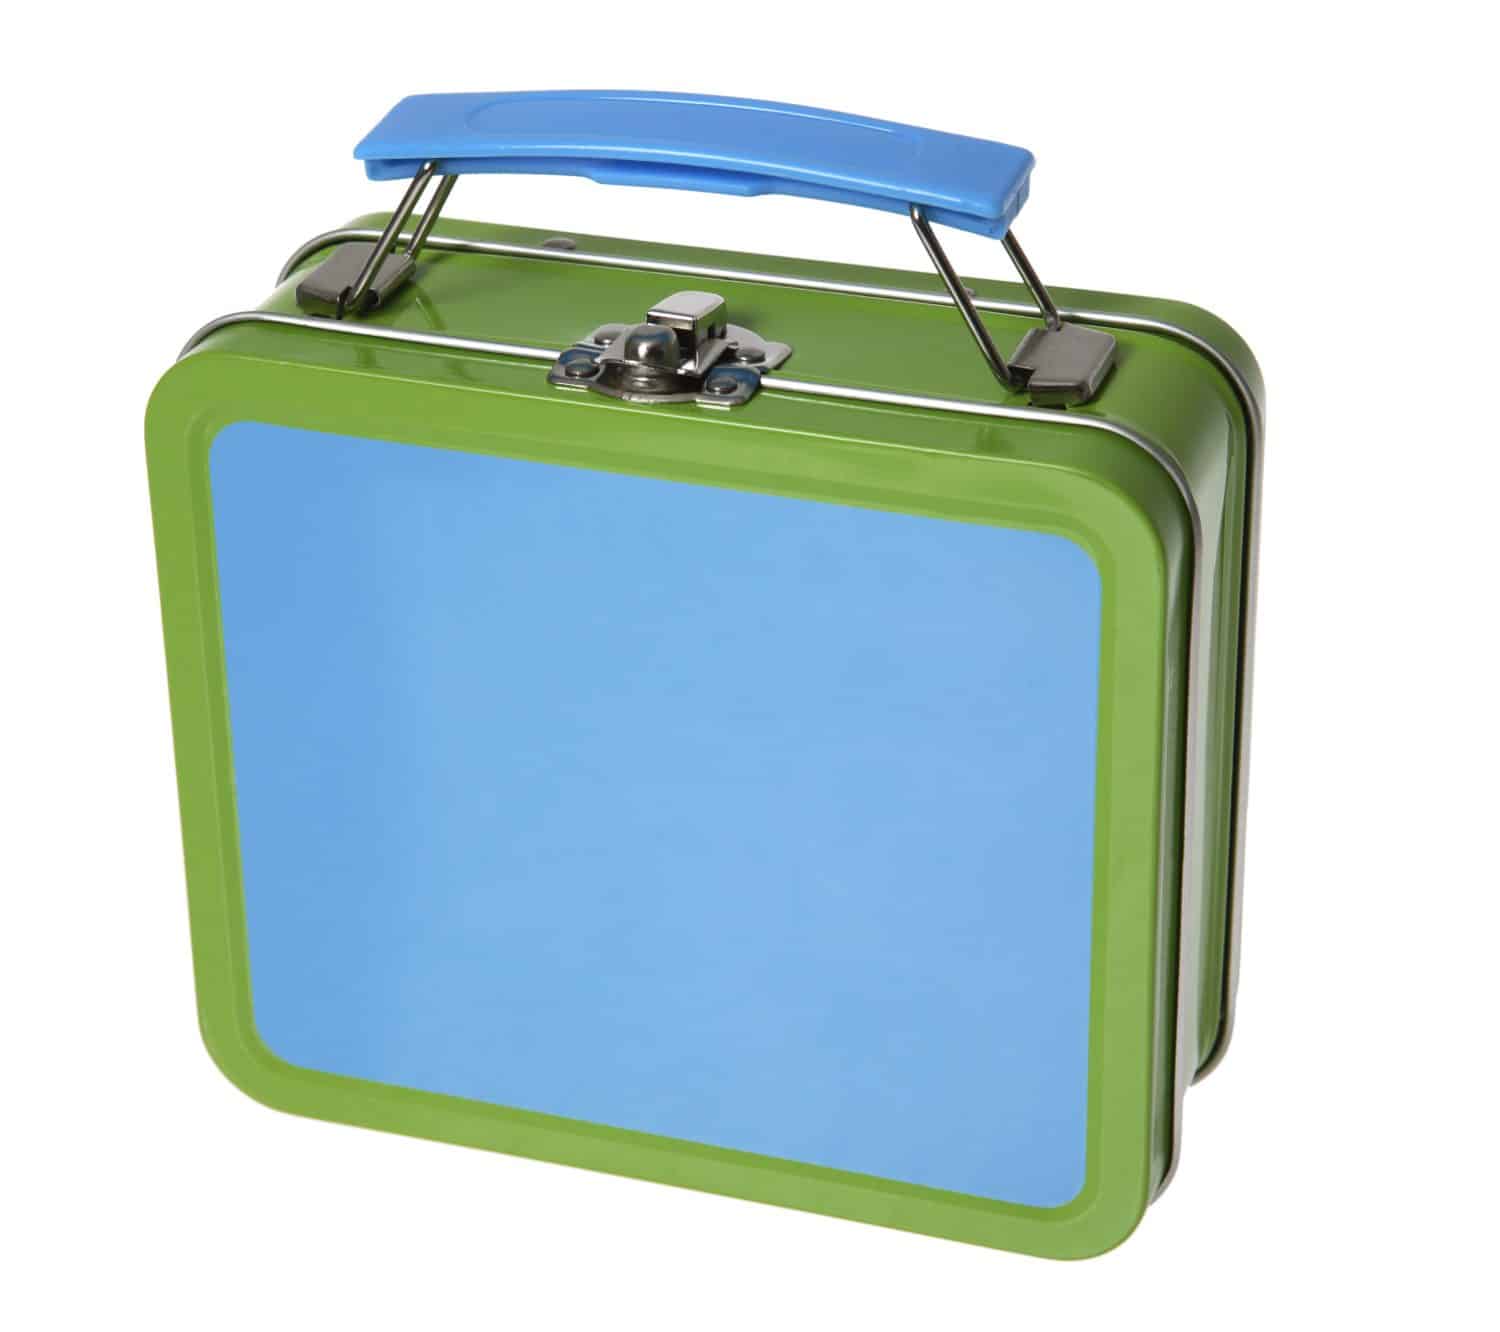 Blue and green metal tin lunchbox on white